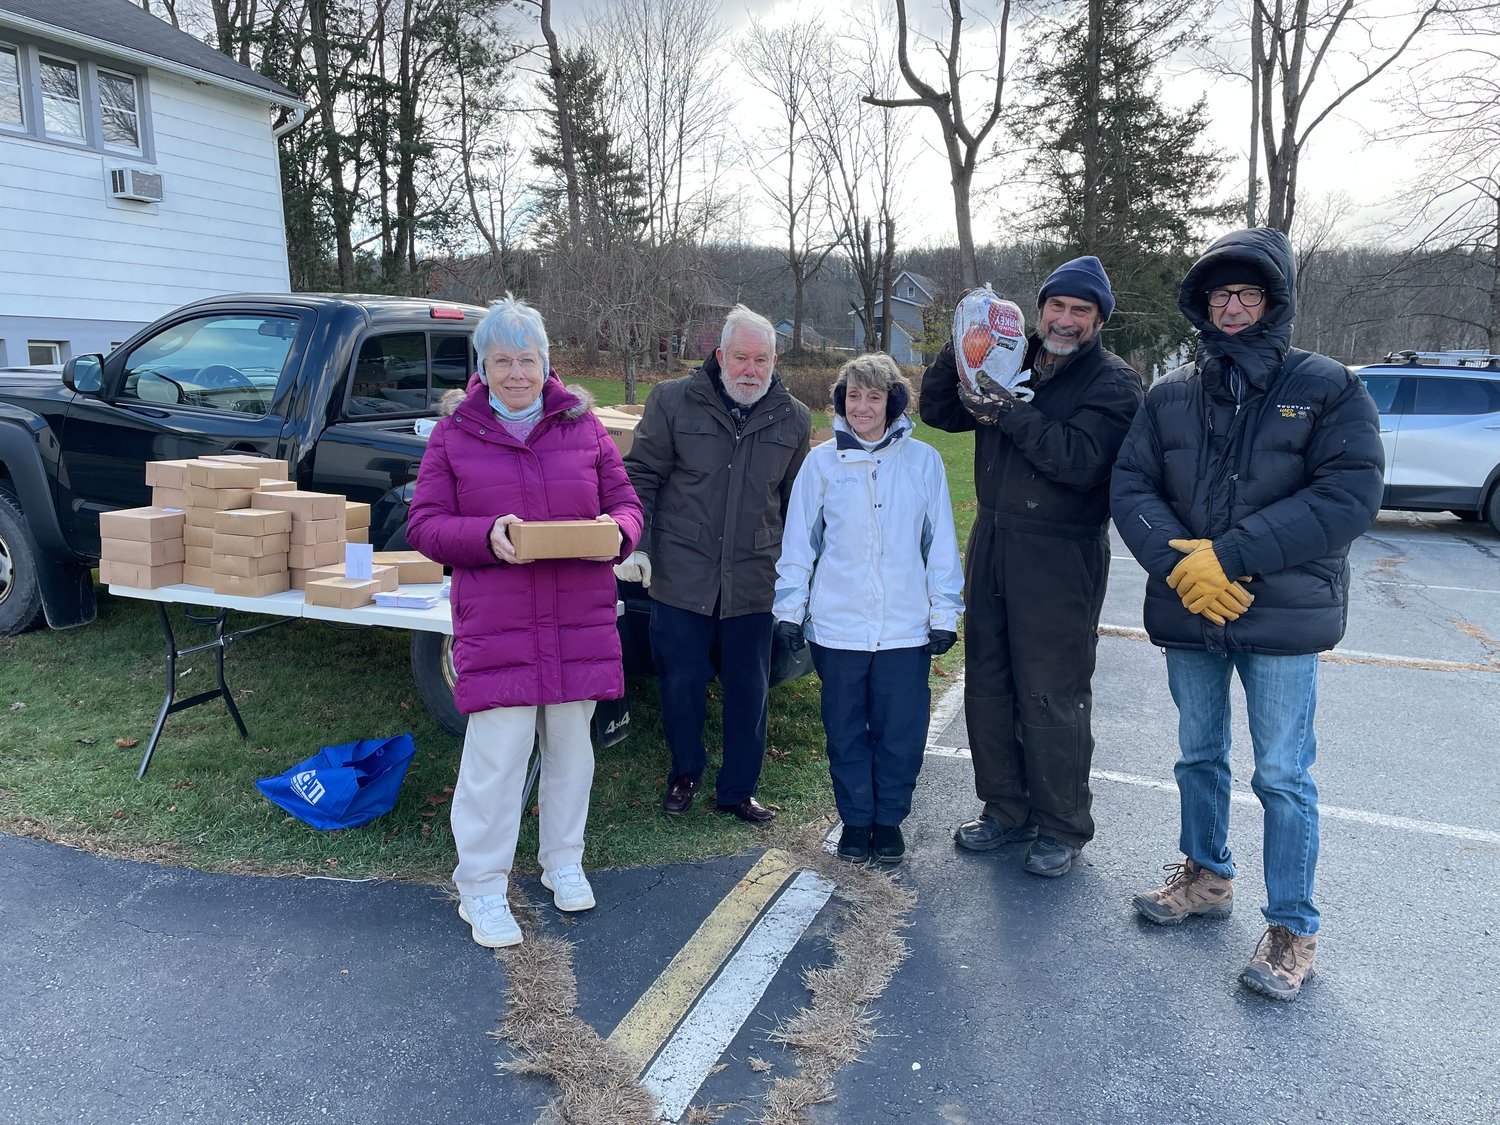 Volunteers from the Ecumenical Food Pantry prepare to distribute Thanksgiving turkeys and pies to members of the community. Beach Lake Bakery donated the pies. The turkeys were donated by Ned Lang.